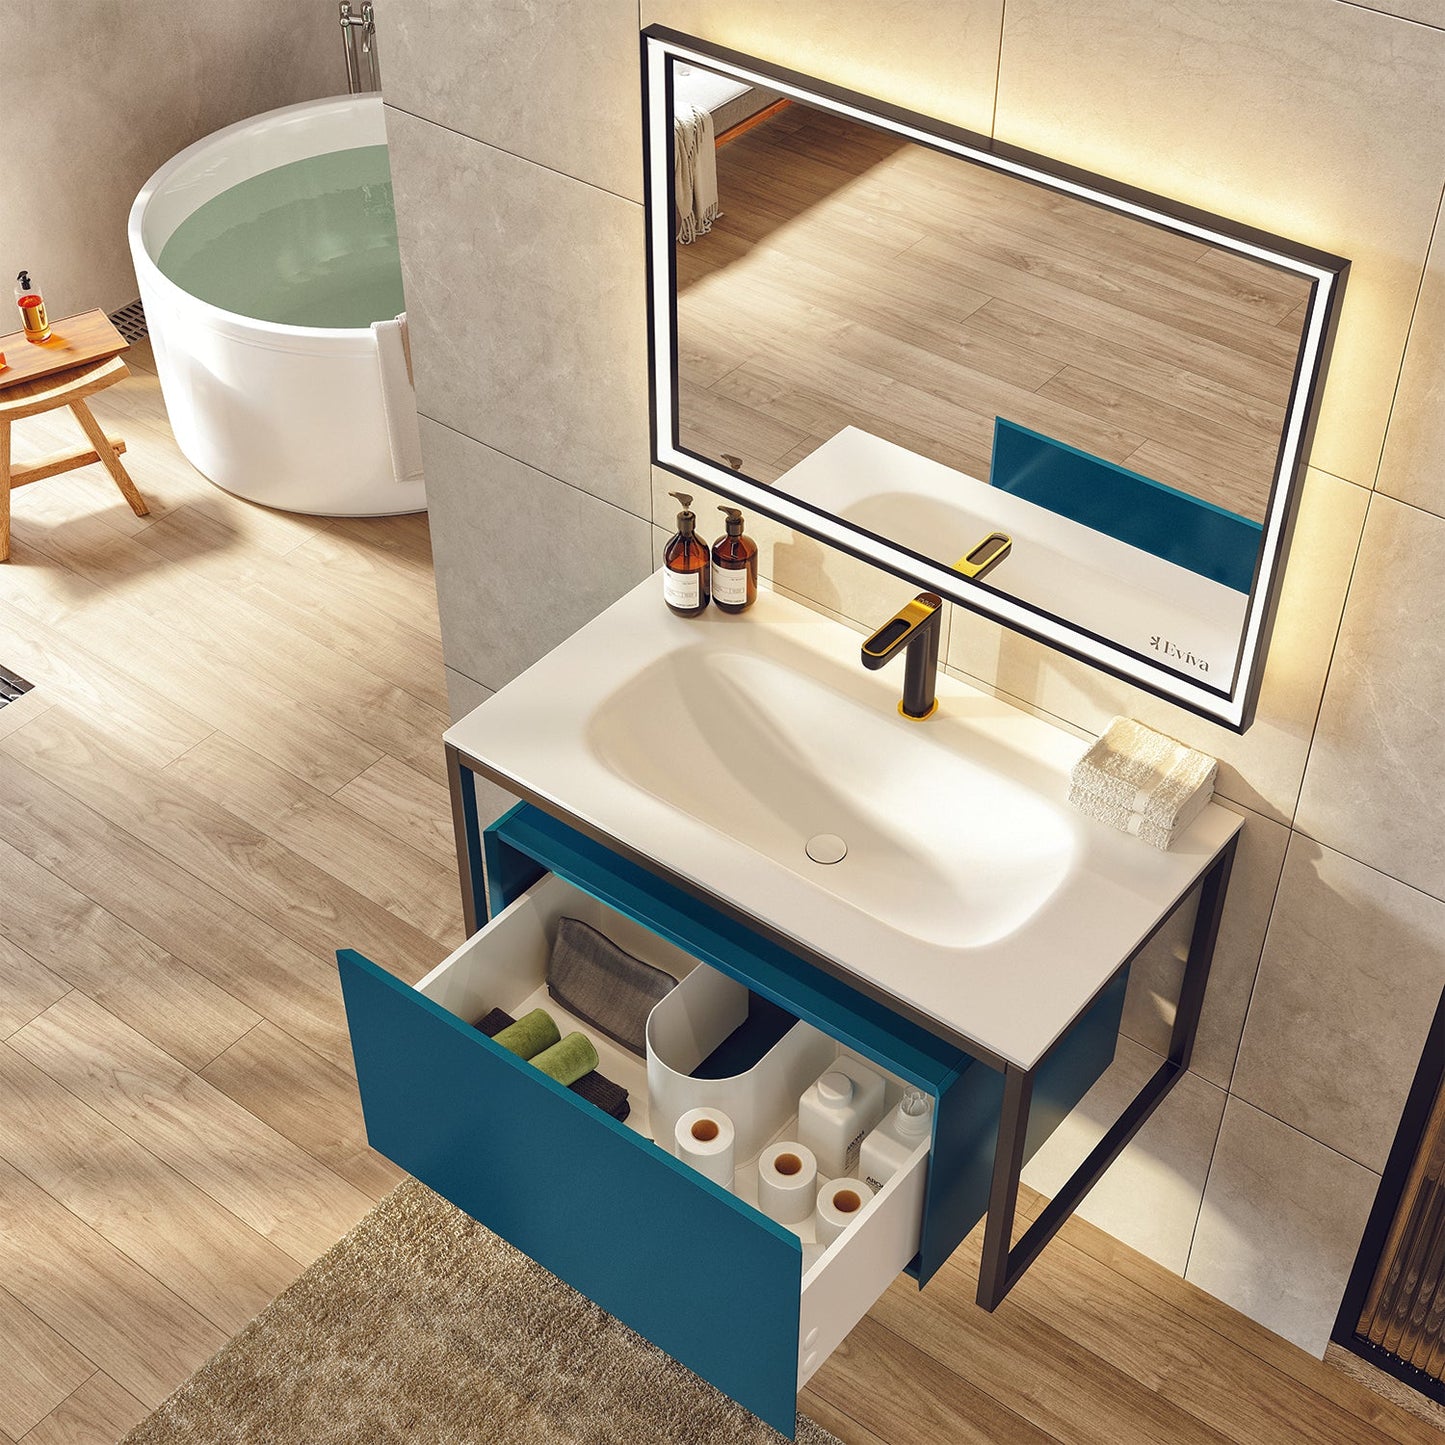 Eviva Modena 32 in. Wall Mounted Teal Bathroom Vanity with White Integrated Solid Surface Countertop